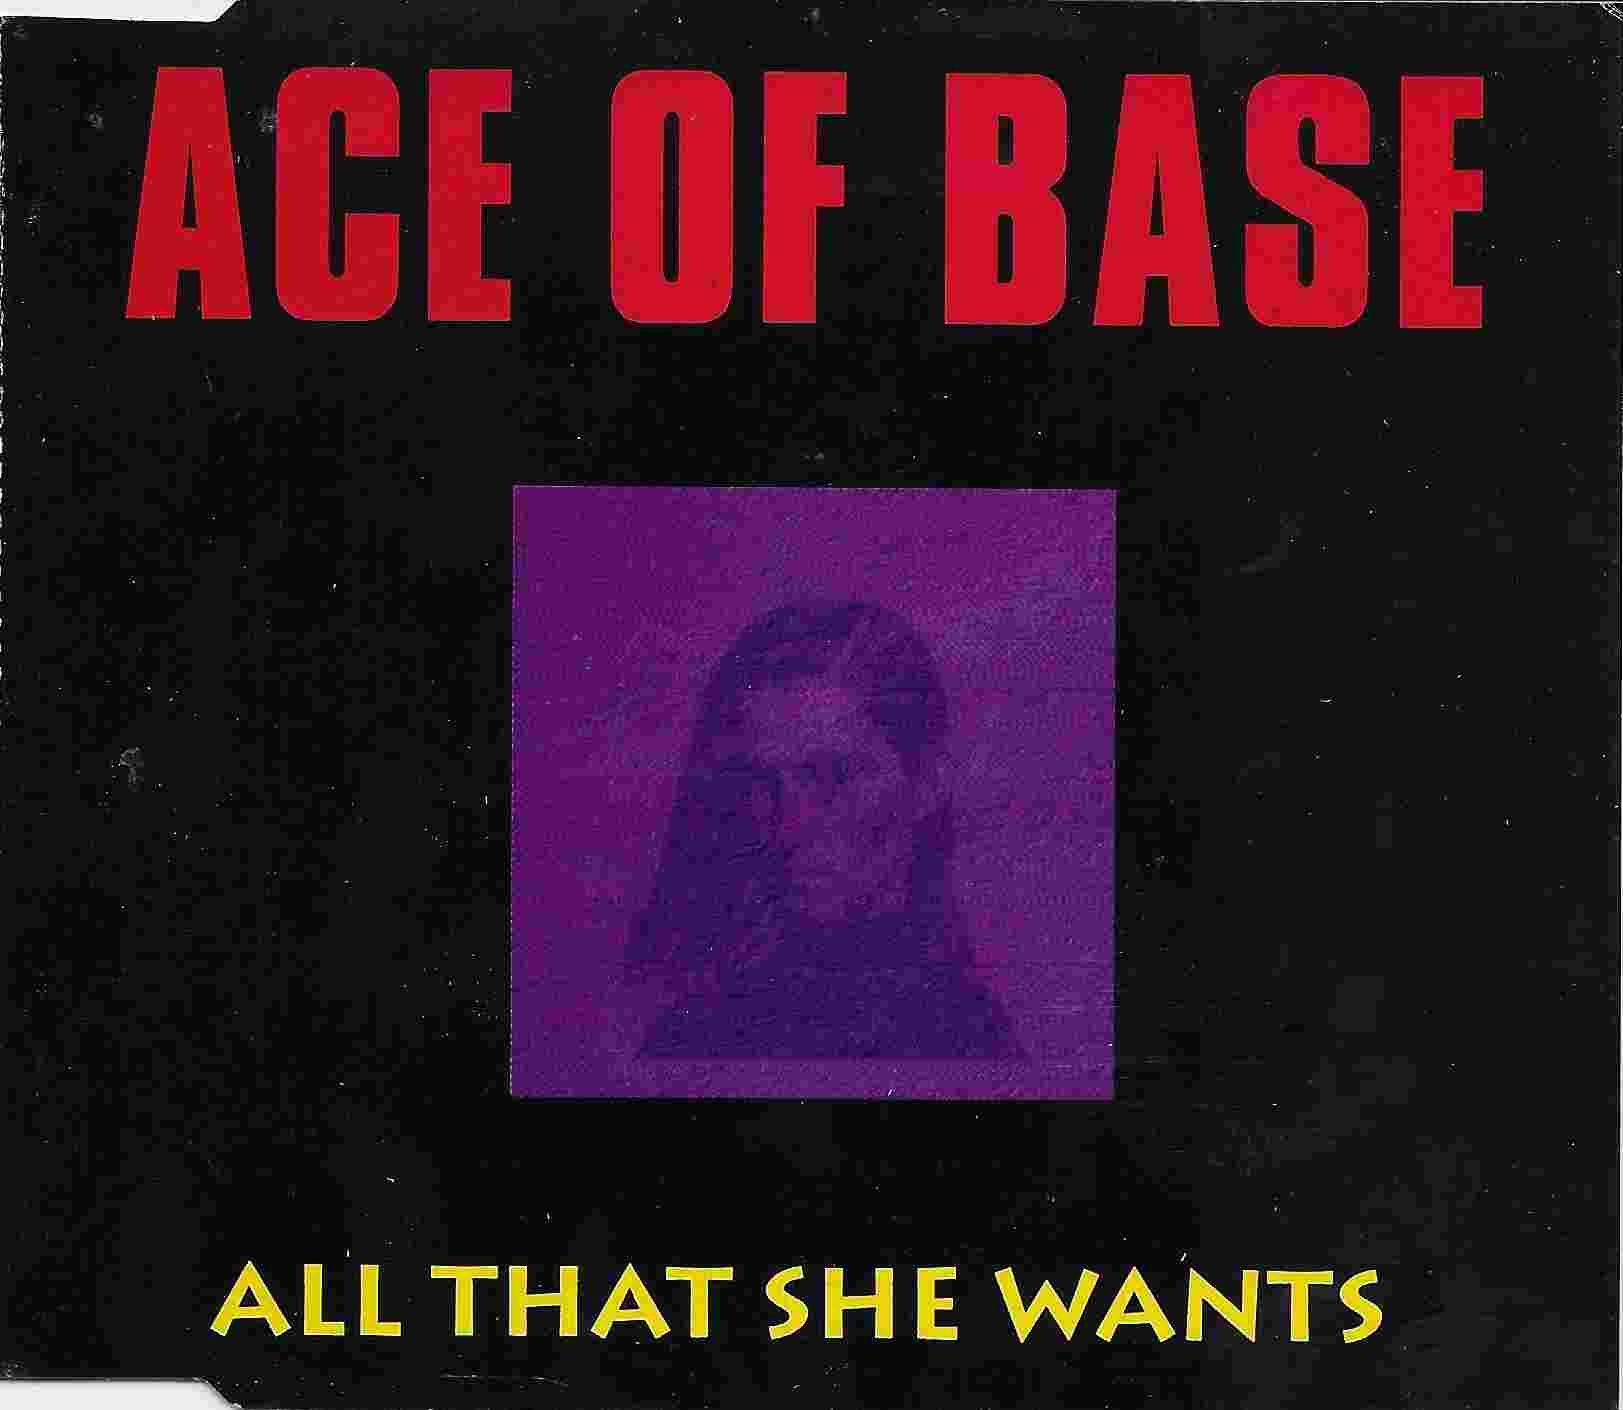 Picture of All that she wants by artist Ace of base 